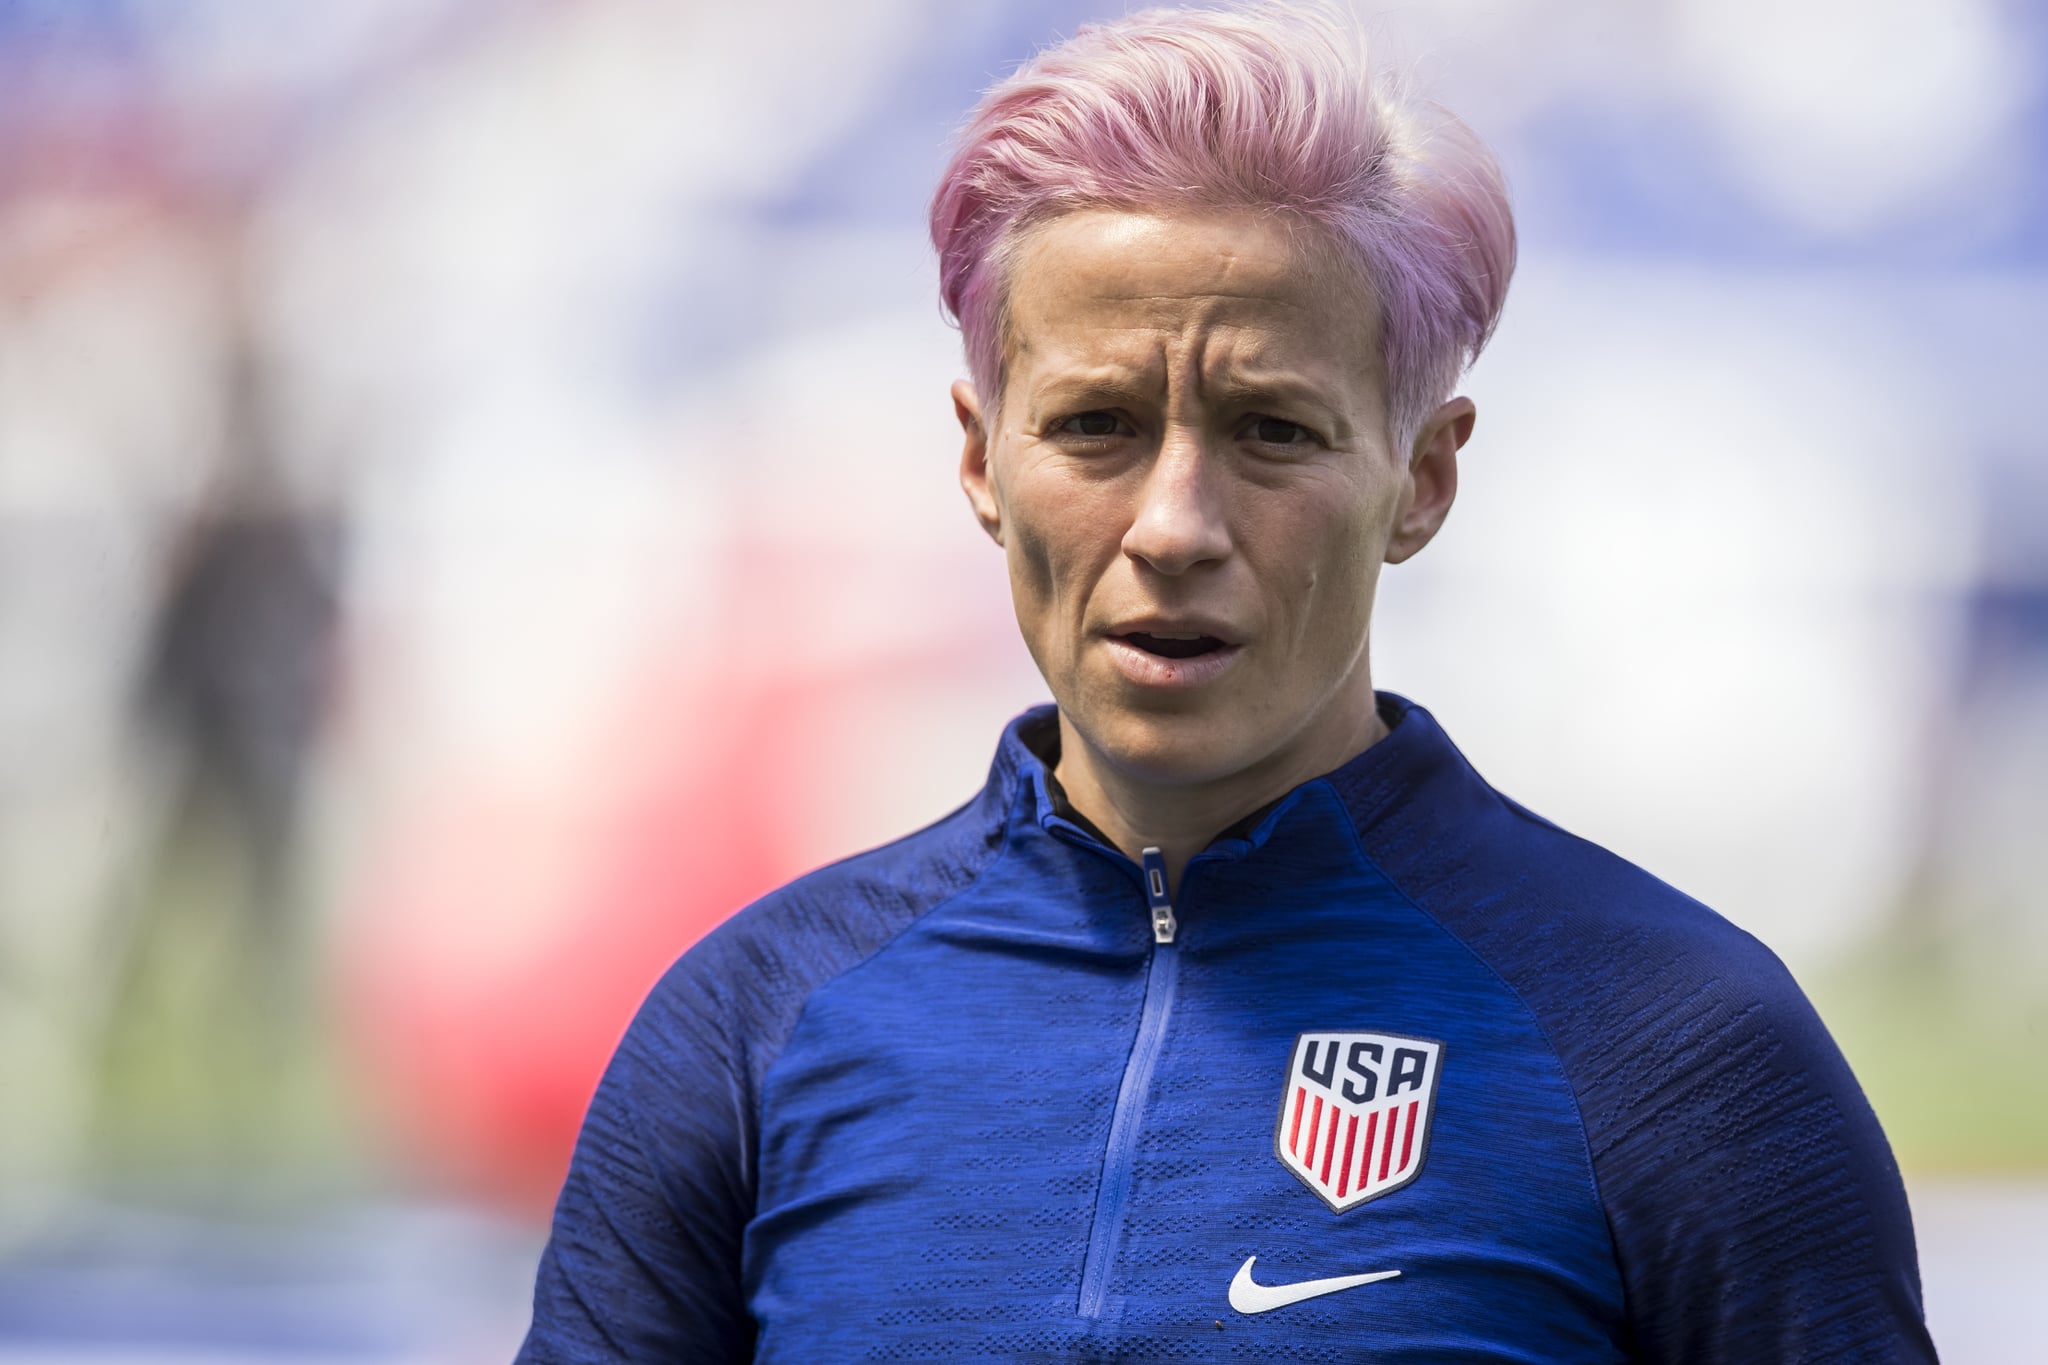 HARRISON, NJ - MAY 26: Megan Rapinoe #15 of United States with pink dyed hair looks at the camera as she warms up at the start of the International Friendly match the U.S. Women's National Team and Mexico as part of the Send Off Series prior to the FIFA Women's World Cup at Red Bull Arena on May 26 2019 in Harrison, NJ, USA. The United States Women's National team won the match with a score of 3 to 0.  (Photo by Ira L. Black/Corbis via Getty Images)